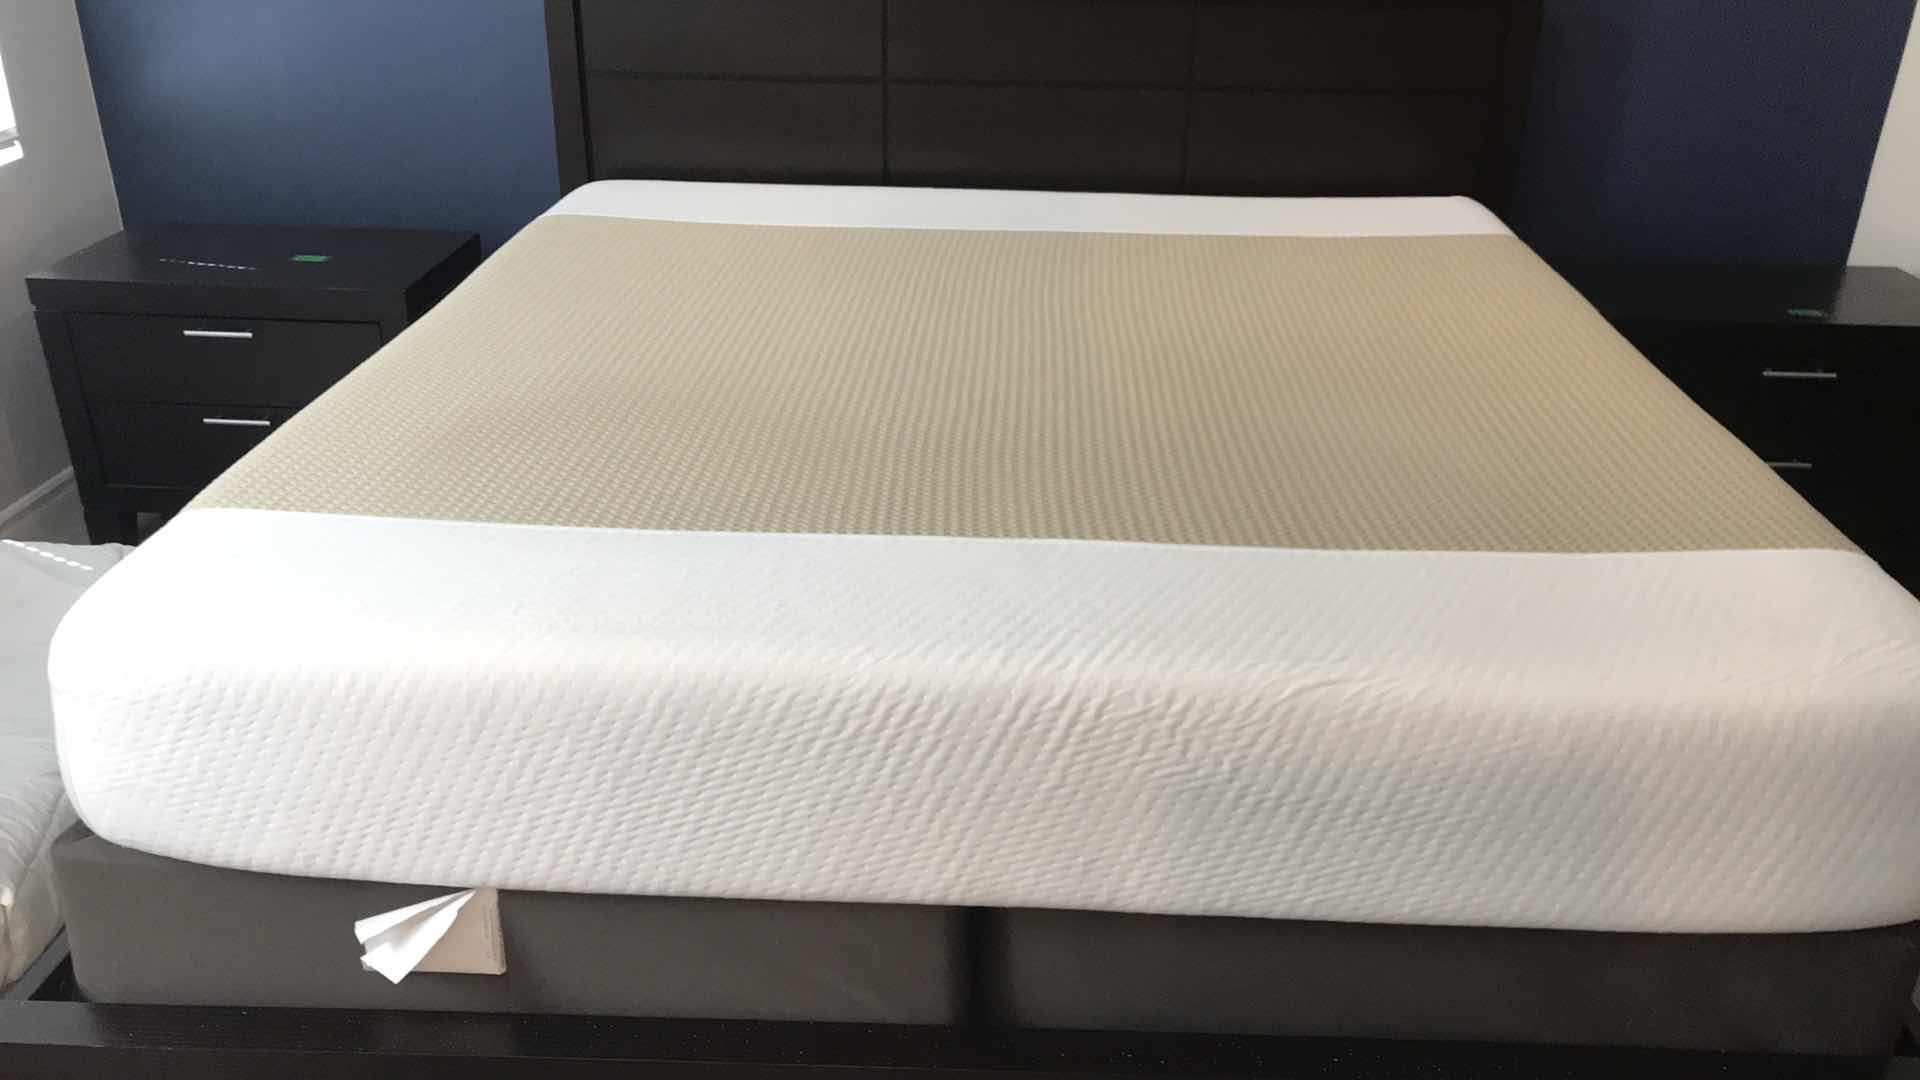 Photo 4 of EMBODY BY SEALY - KING SIZE PROPHECY MEMORY FOAM MATTRESS 

